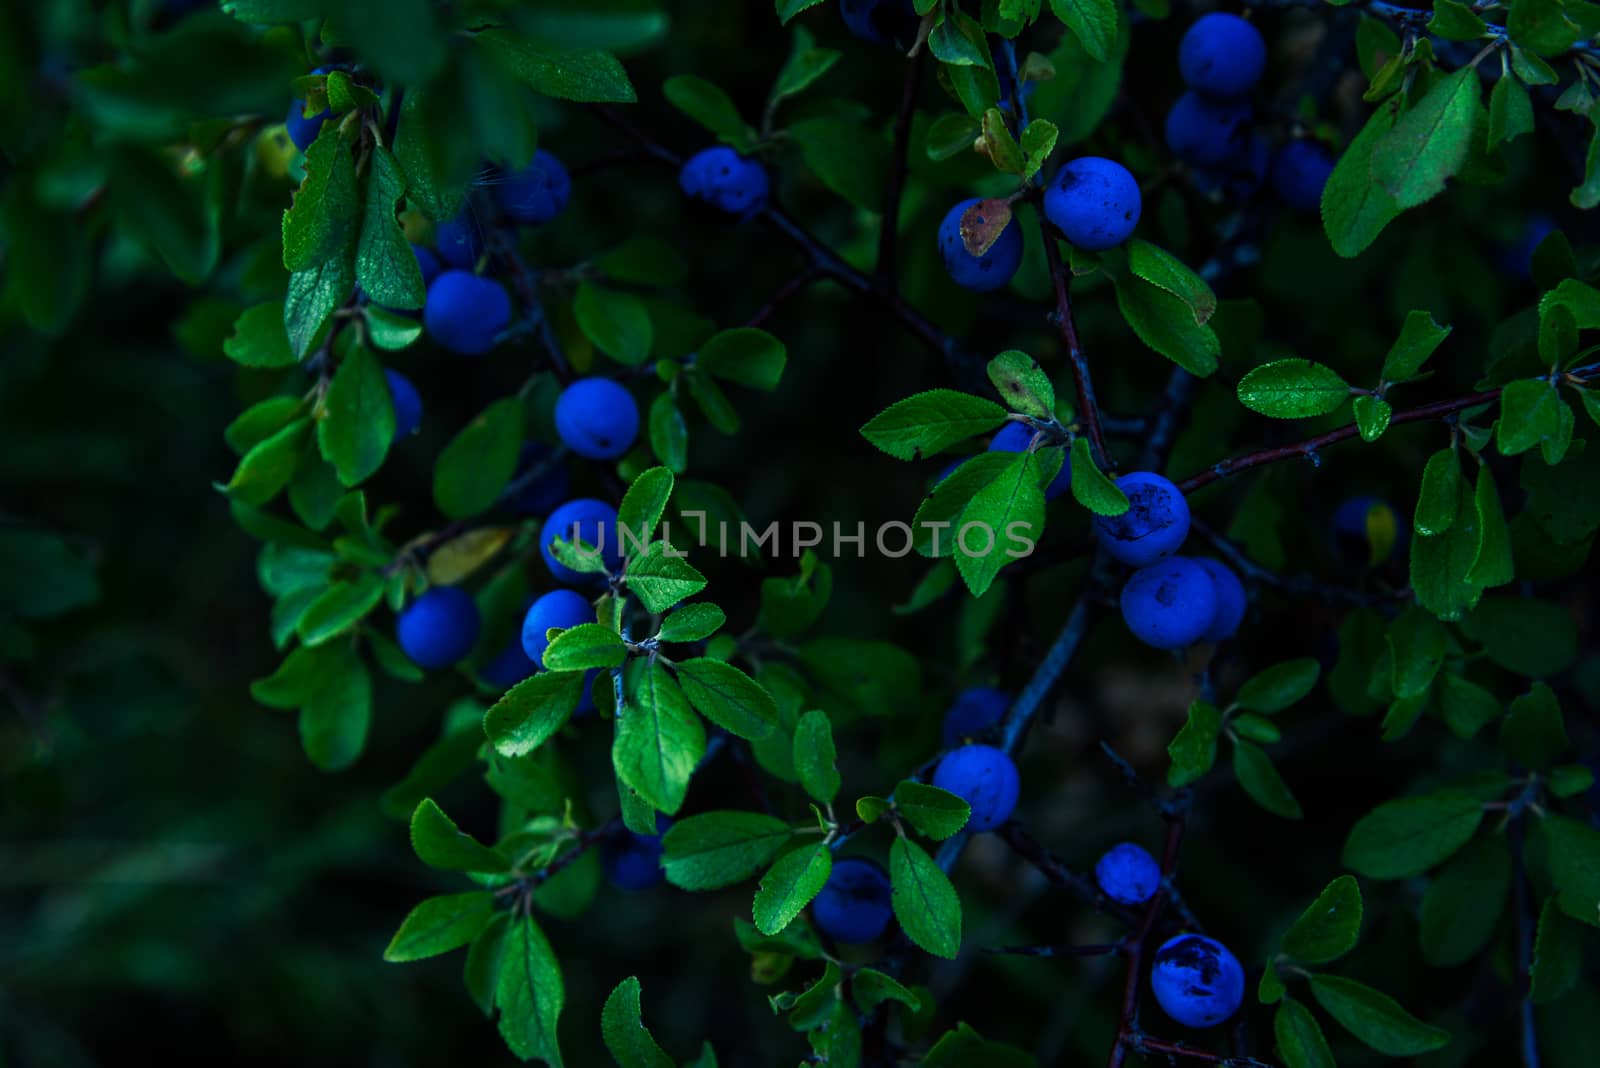 Blackthorn (Prunus spinosa) bush with berries in the evening